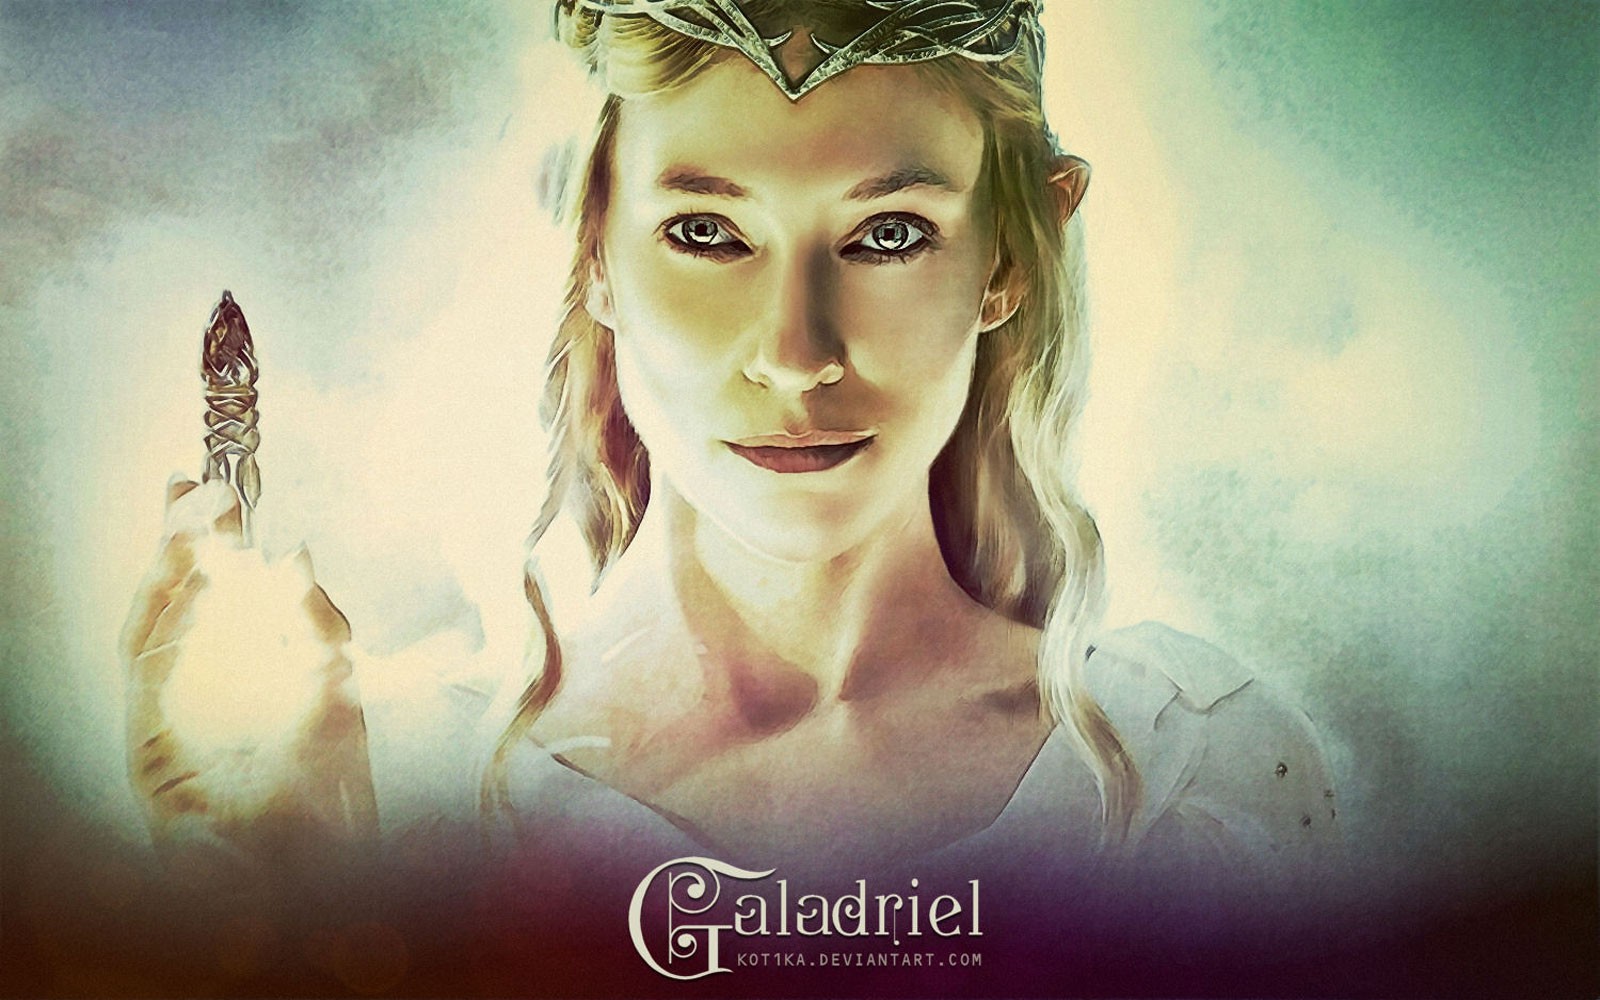 General 1600x1000 The Lord of the Rings fantasy art Galadriel Cate Blanchett movies blonde face artwork fantasy girl DeviantArt actress women